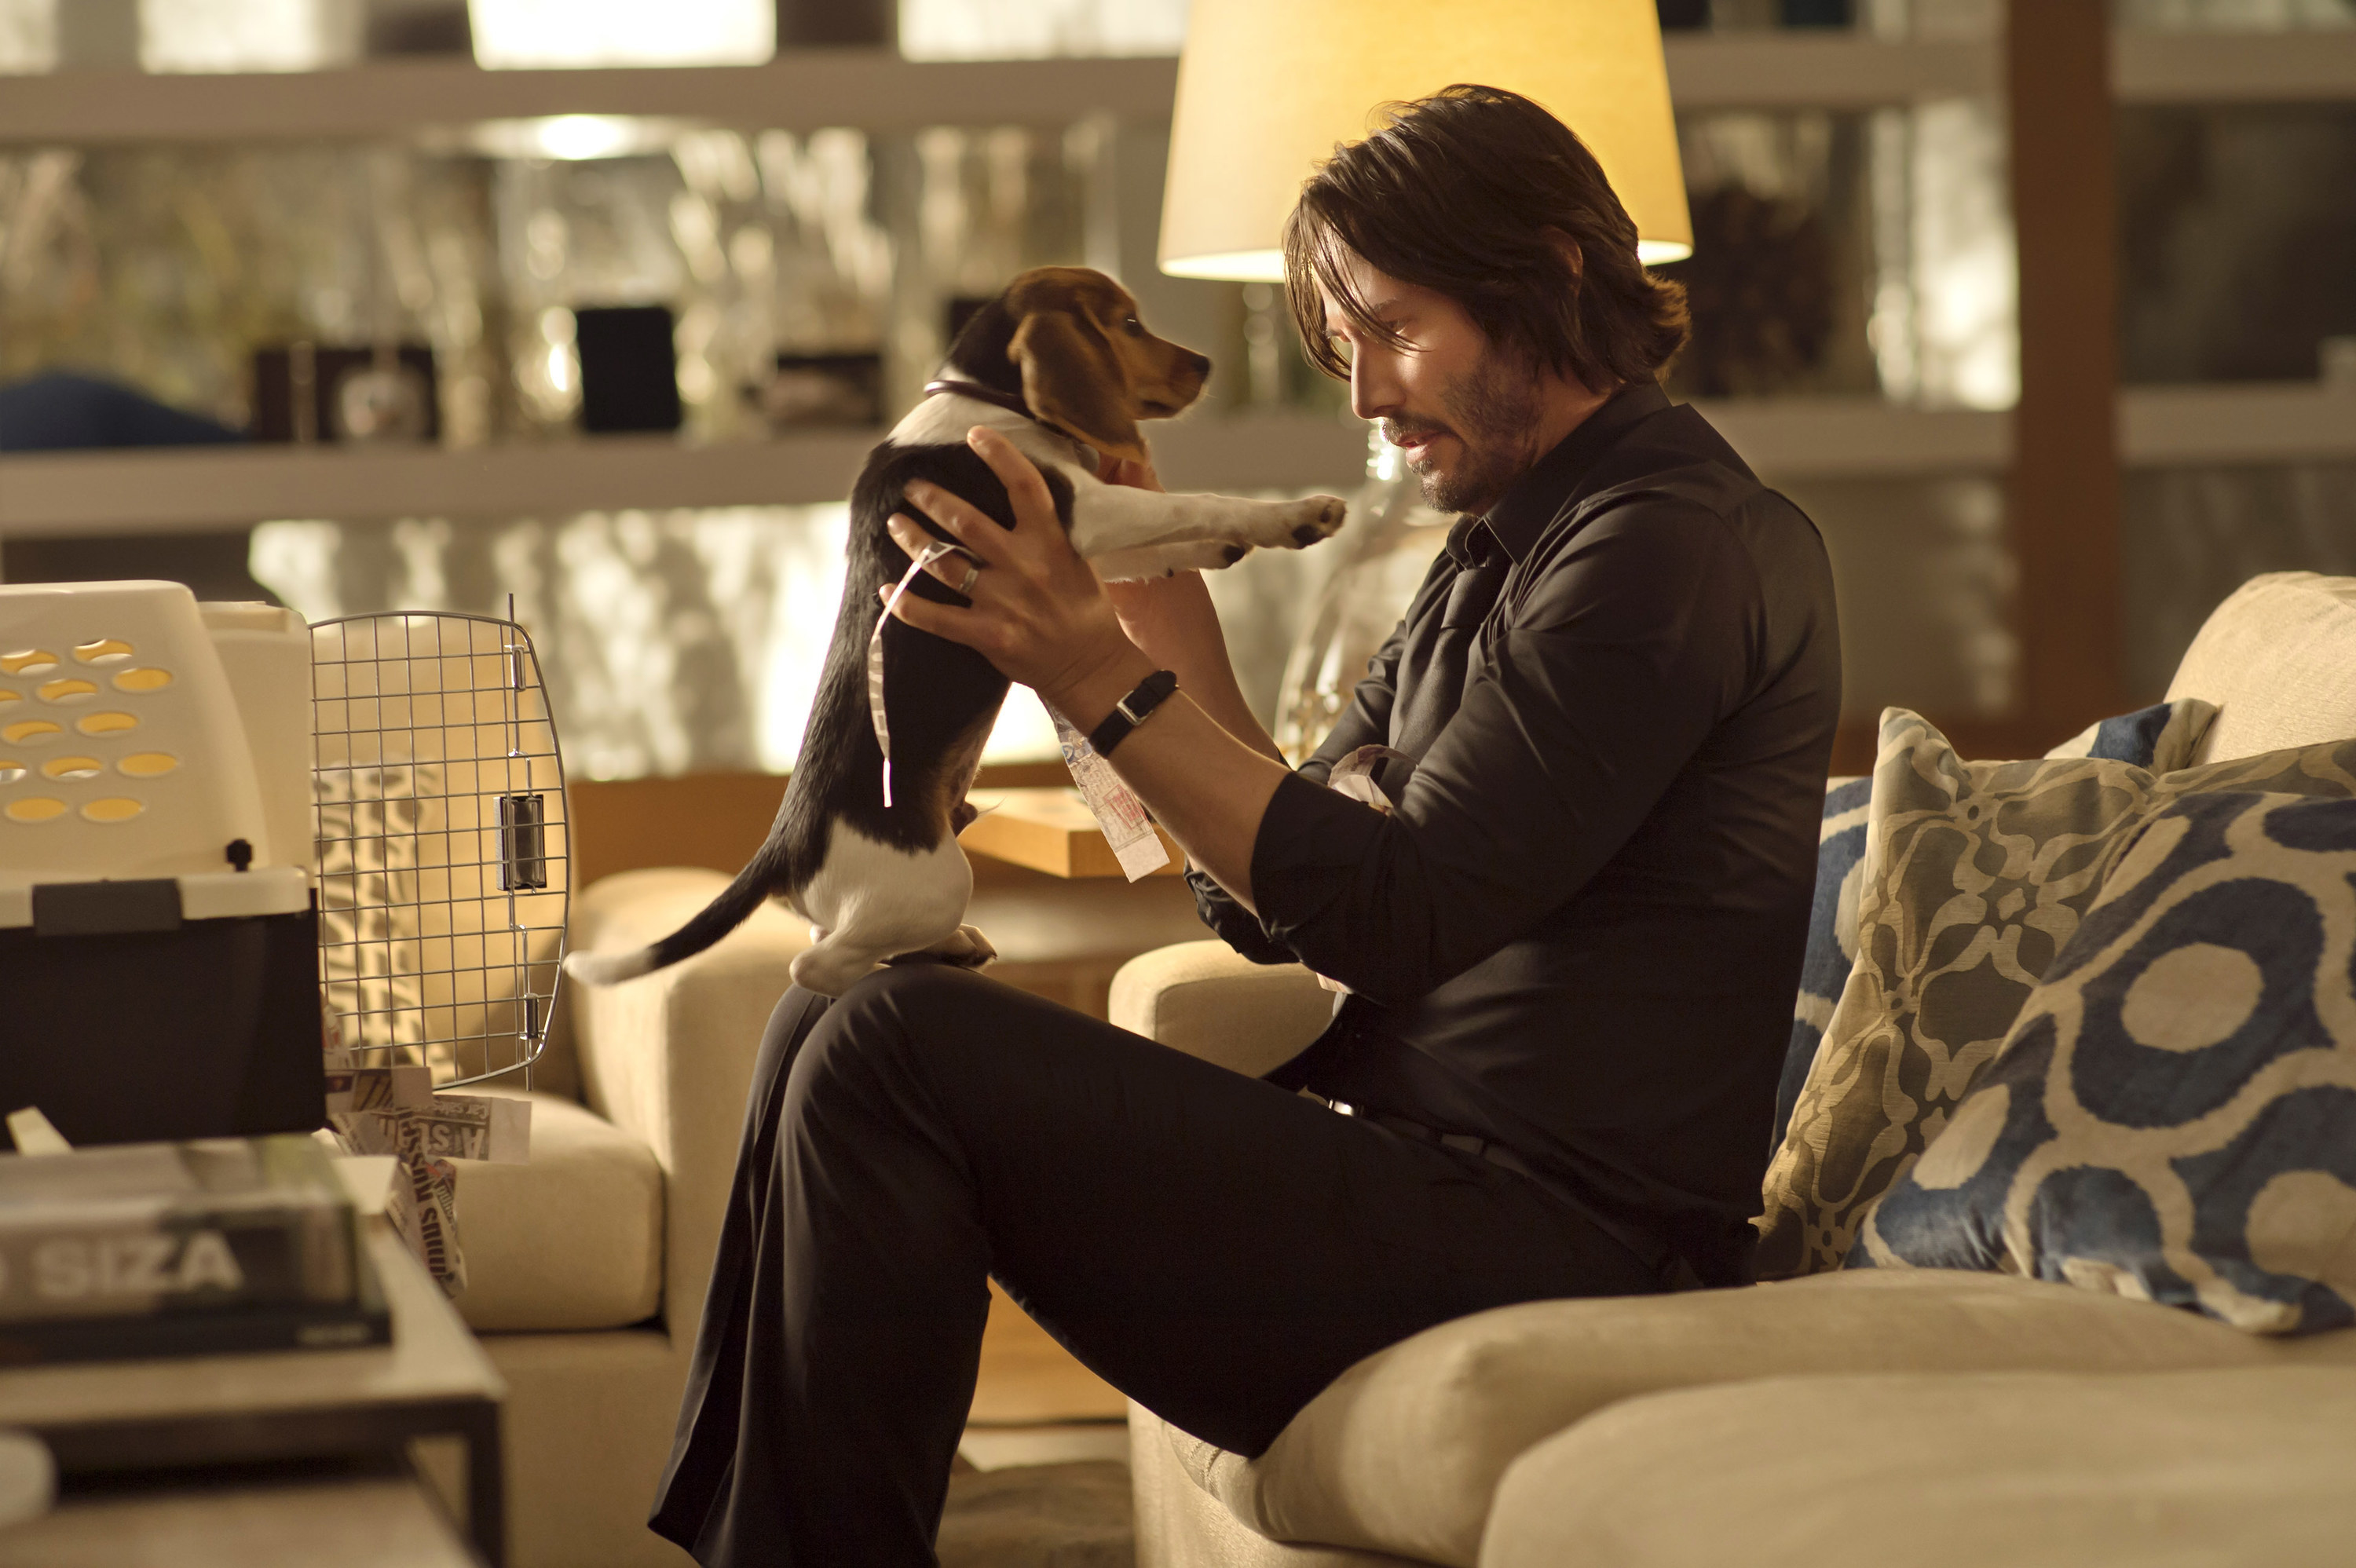 John Wick holding up a puppy while he sits on the couch